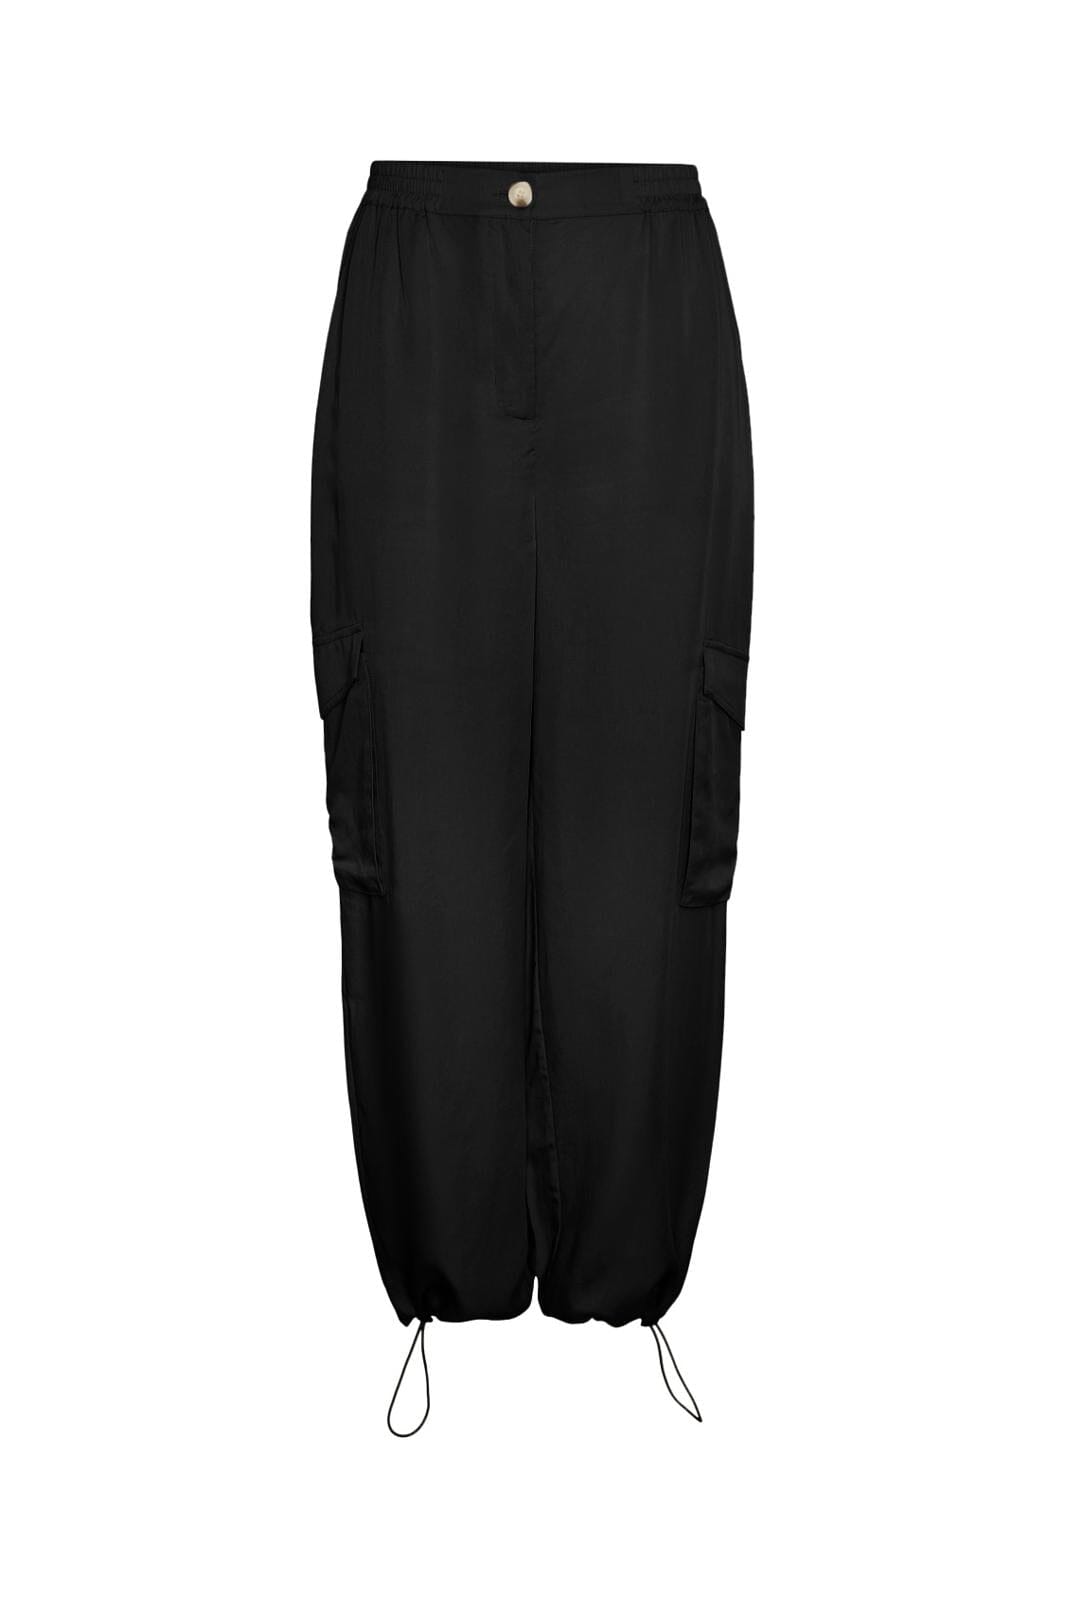 Y.A.S - Yasbamboo Hmw Pant - 4437671 Black